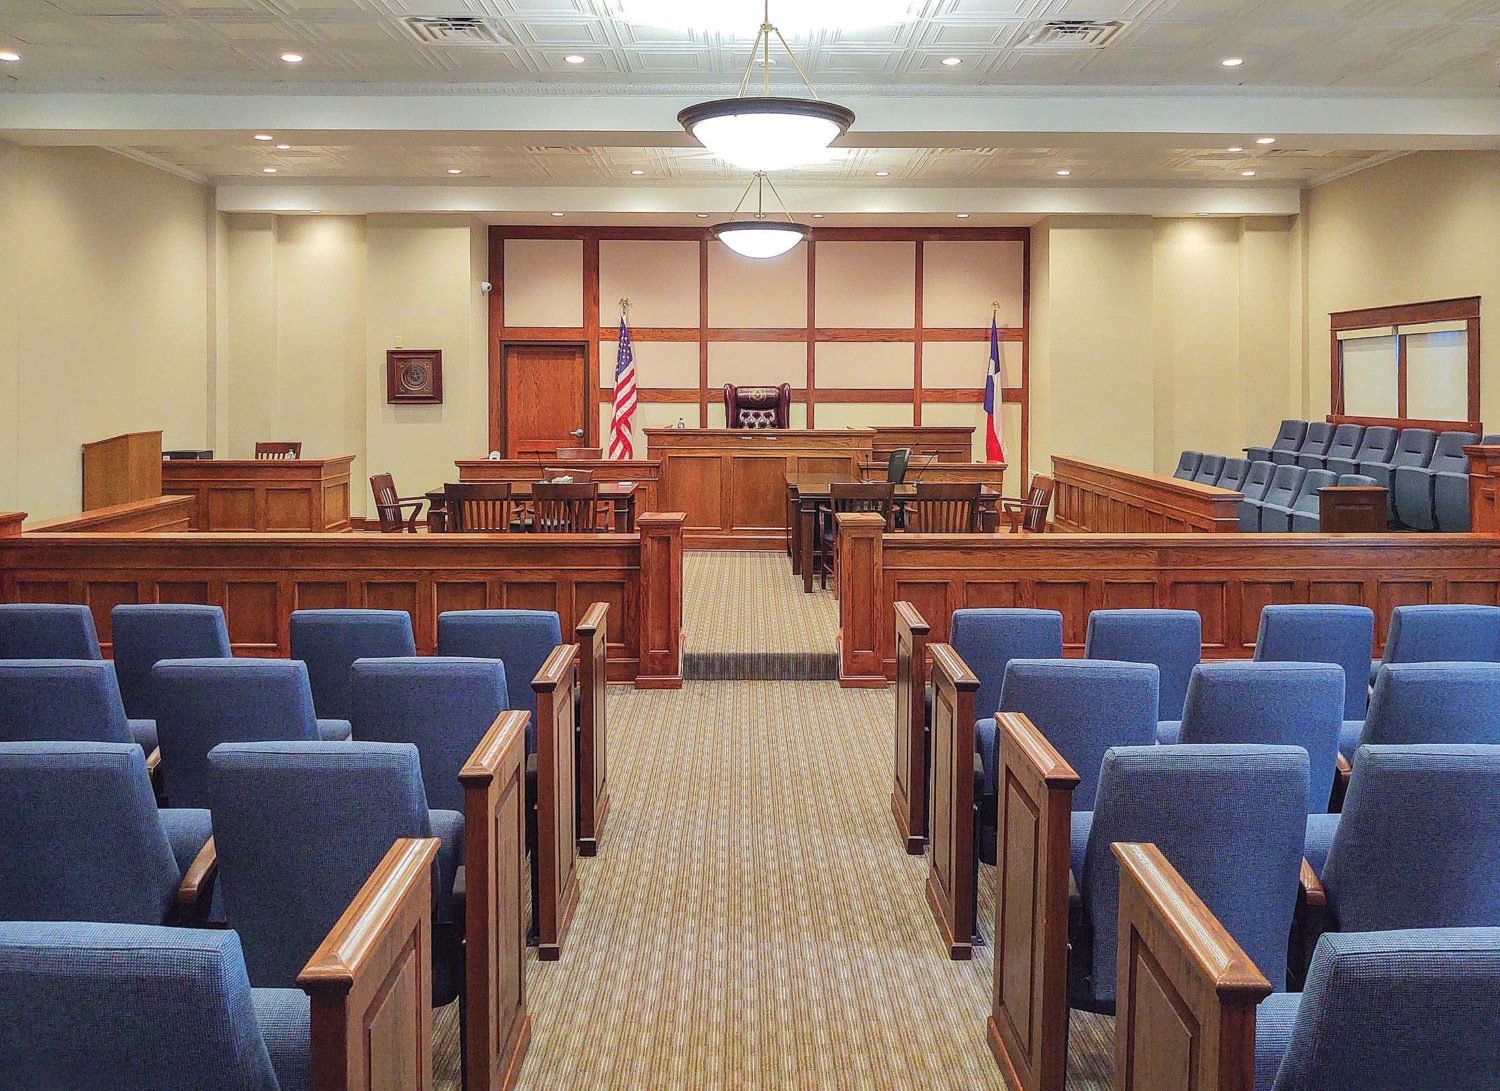 Clarity Auditorium Seating in Hemphill County Courthouse - Candian, TX